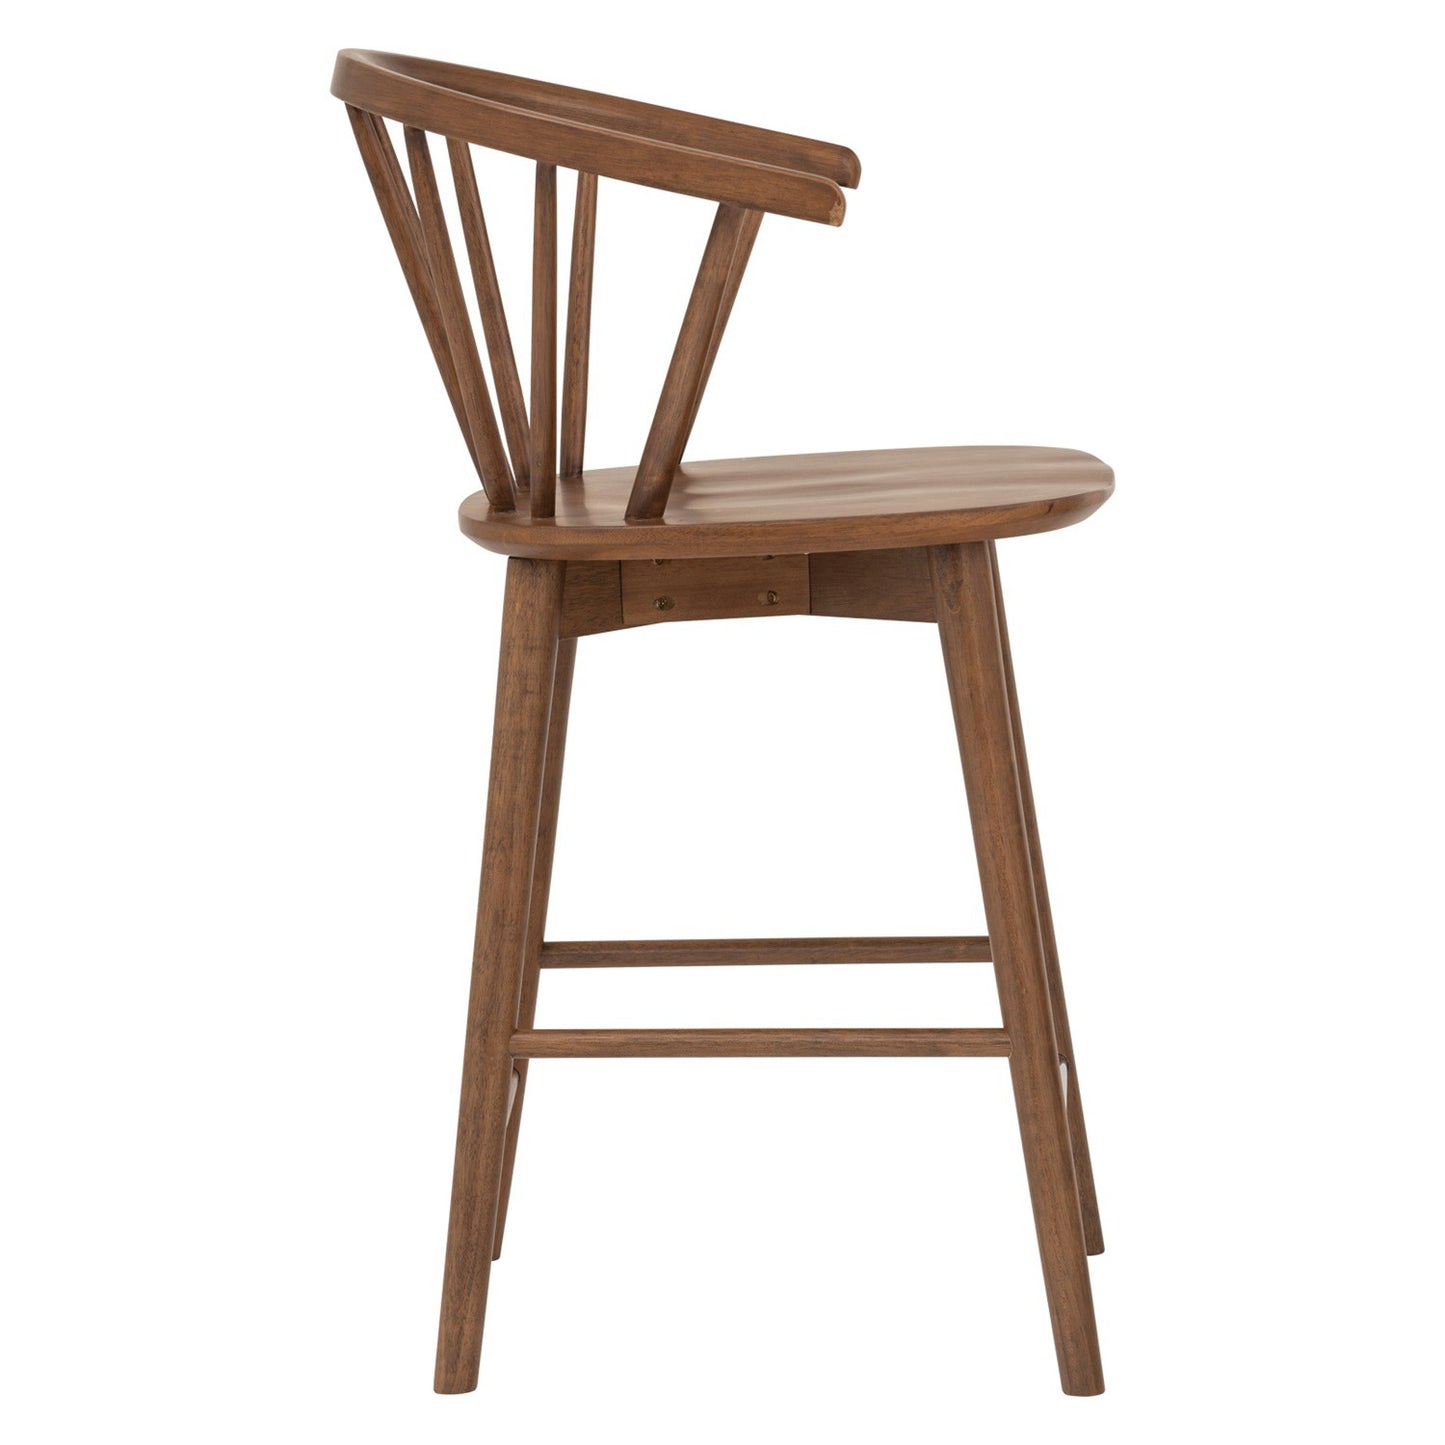 CALEY COUNTER CHAIR 109